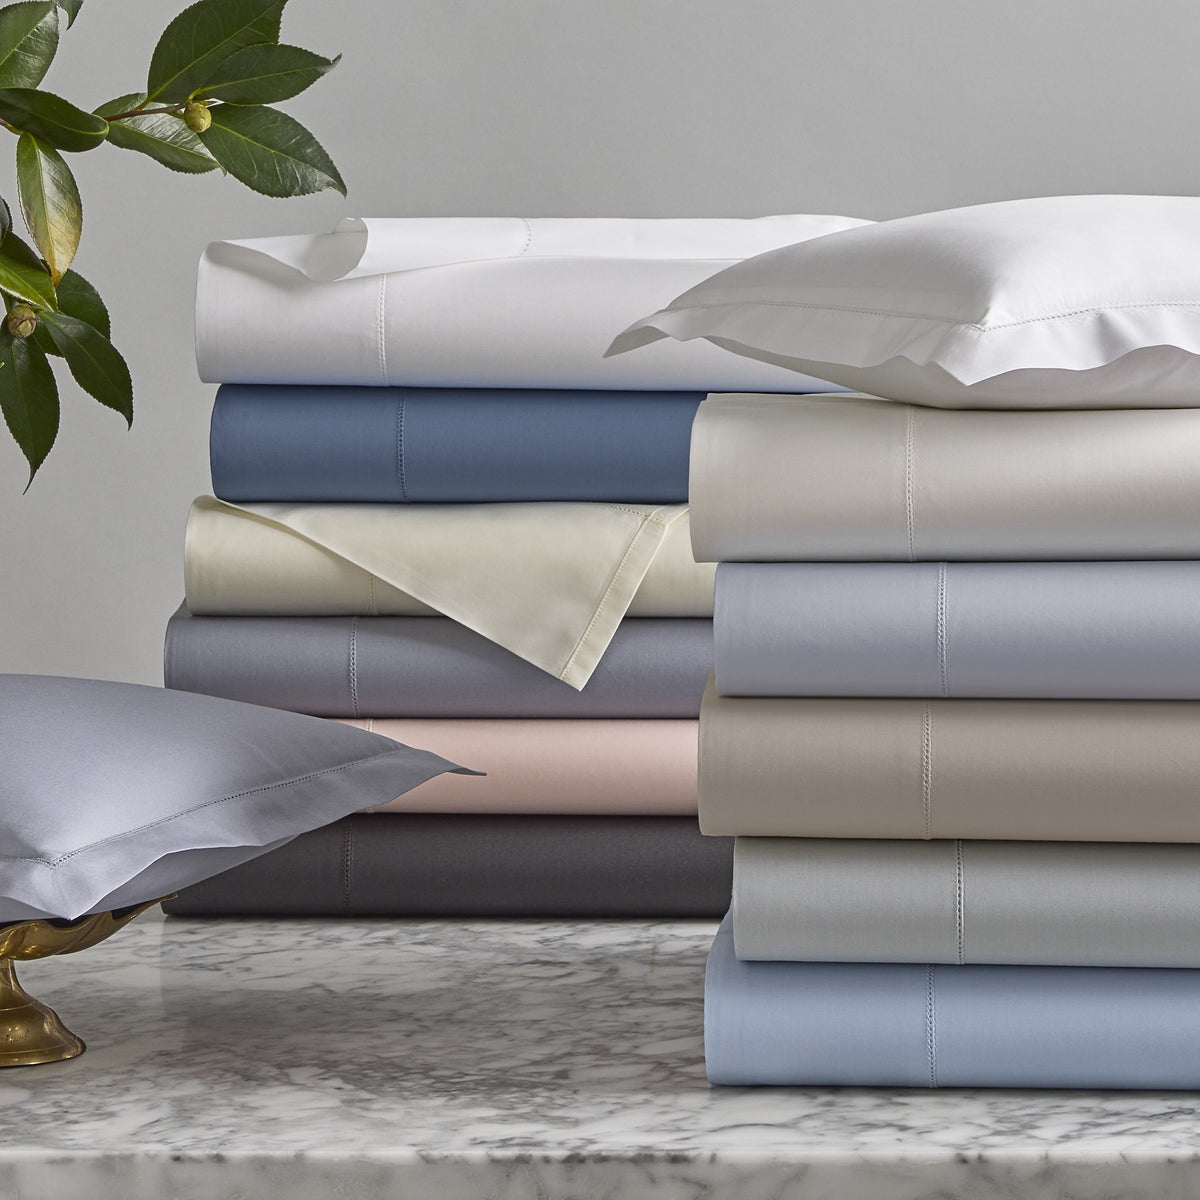 Stack of Matouk Milano Hemstitch Bedding in Different Colors